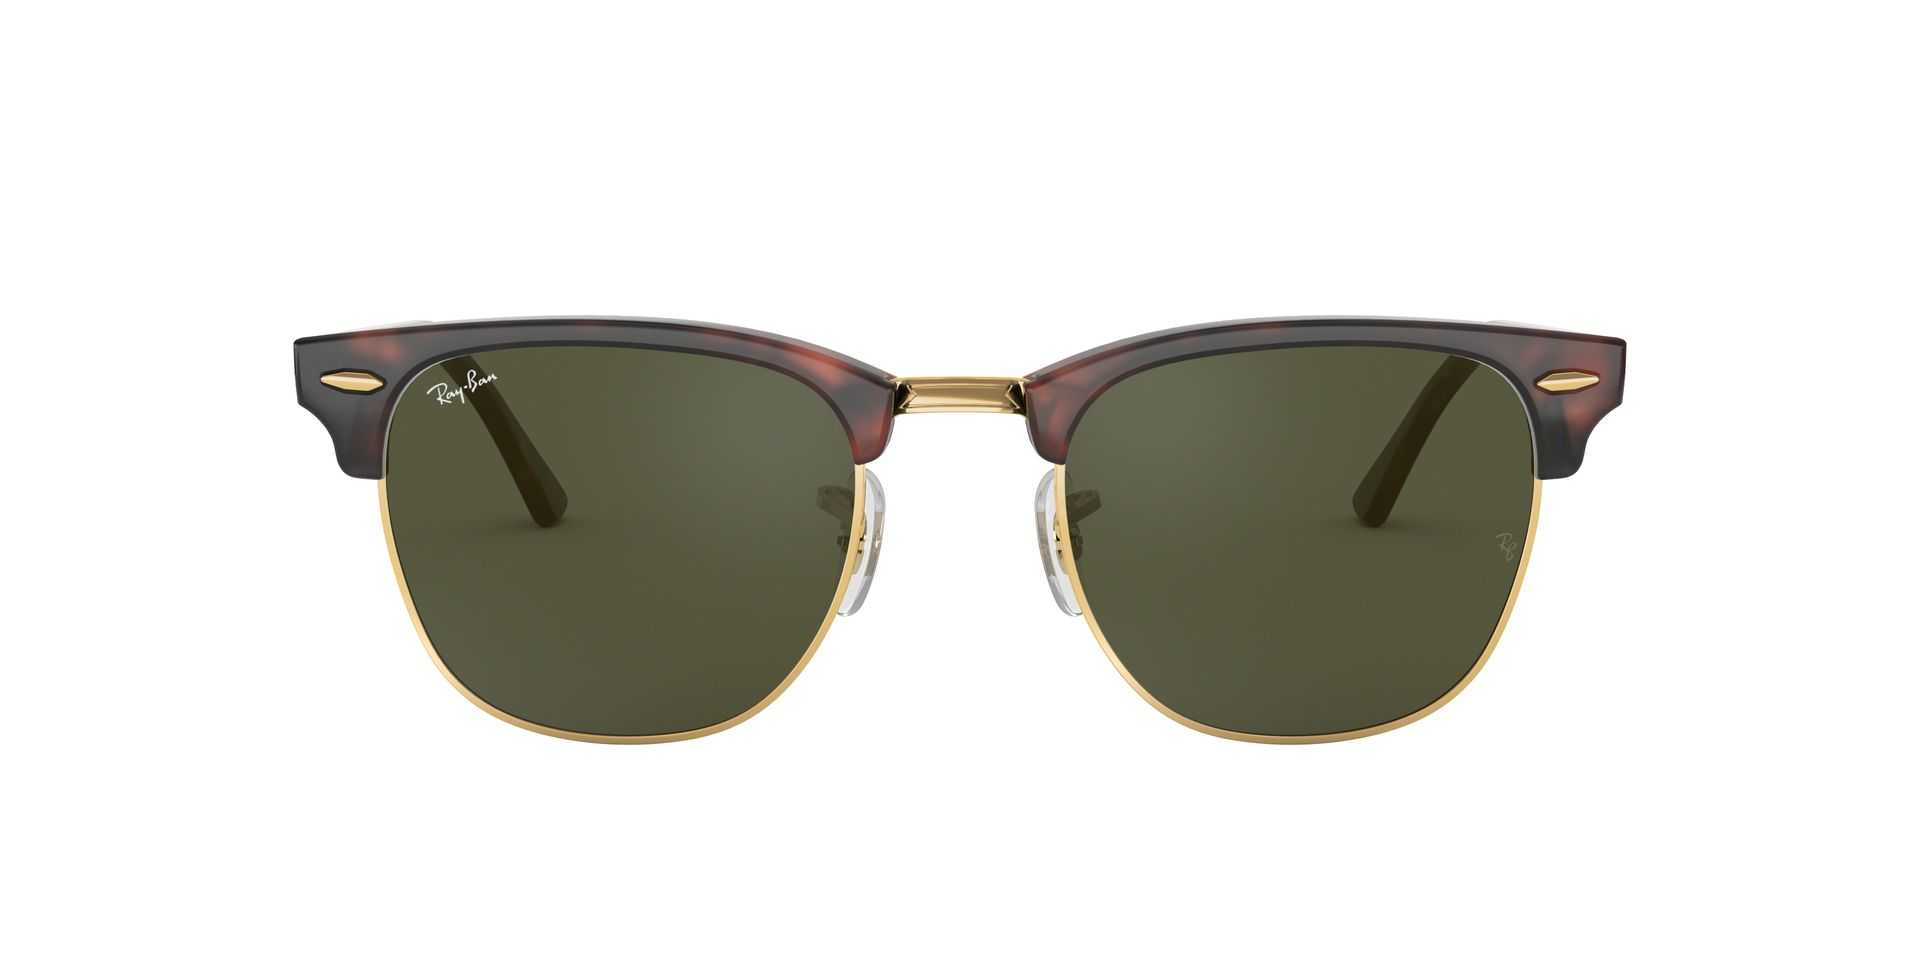 classic ray ban styles